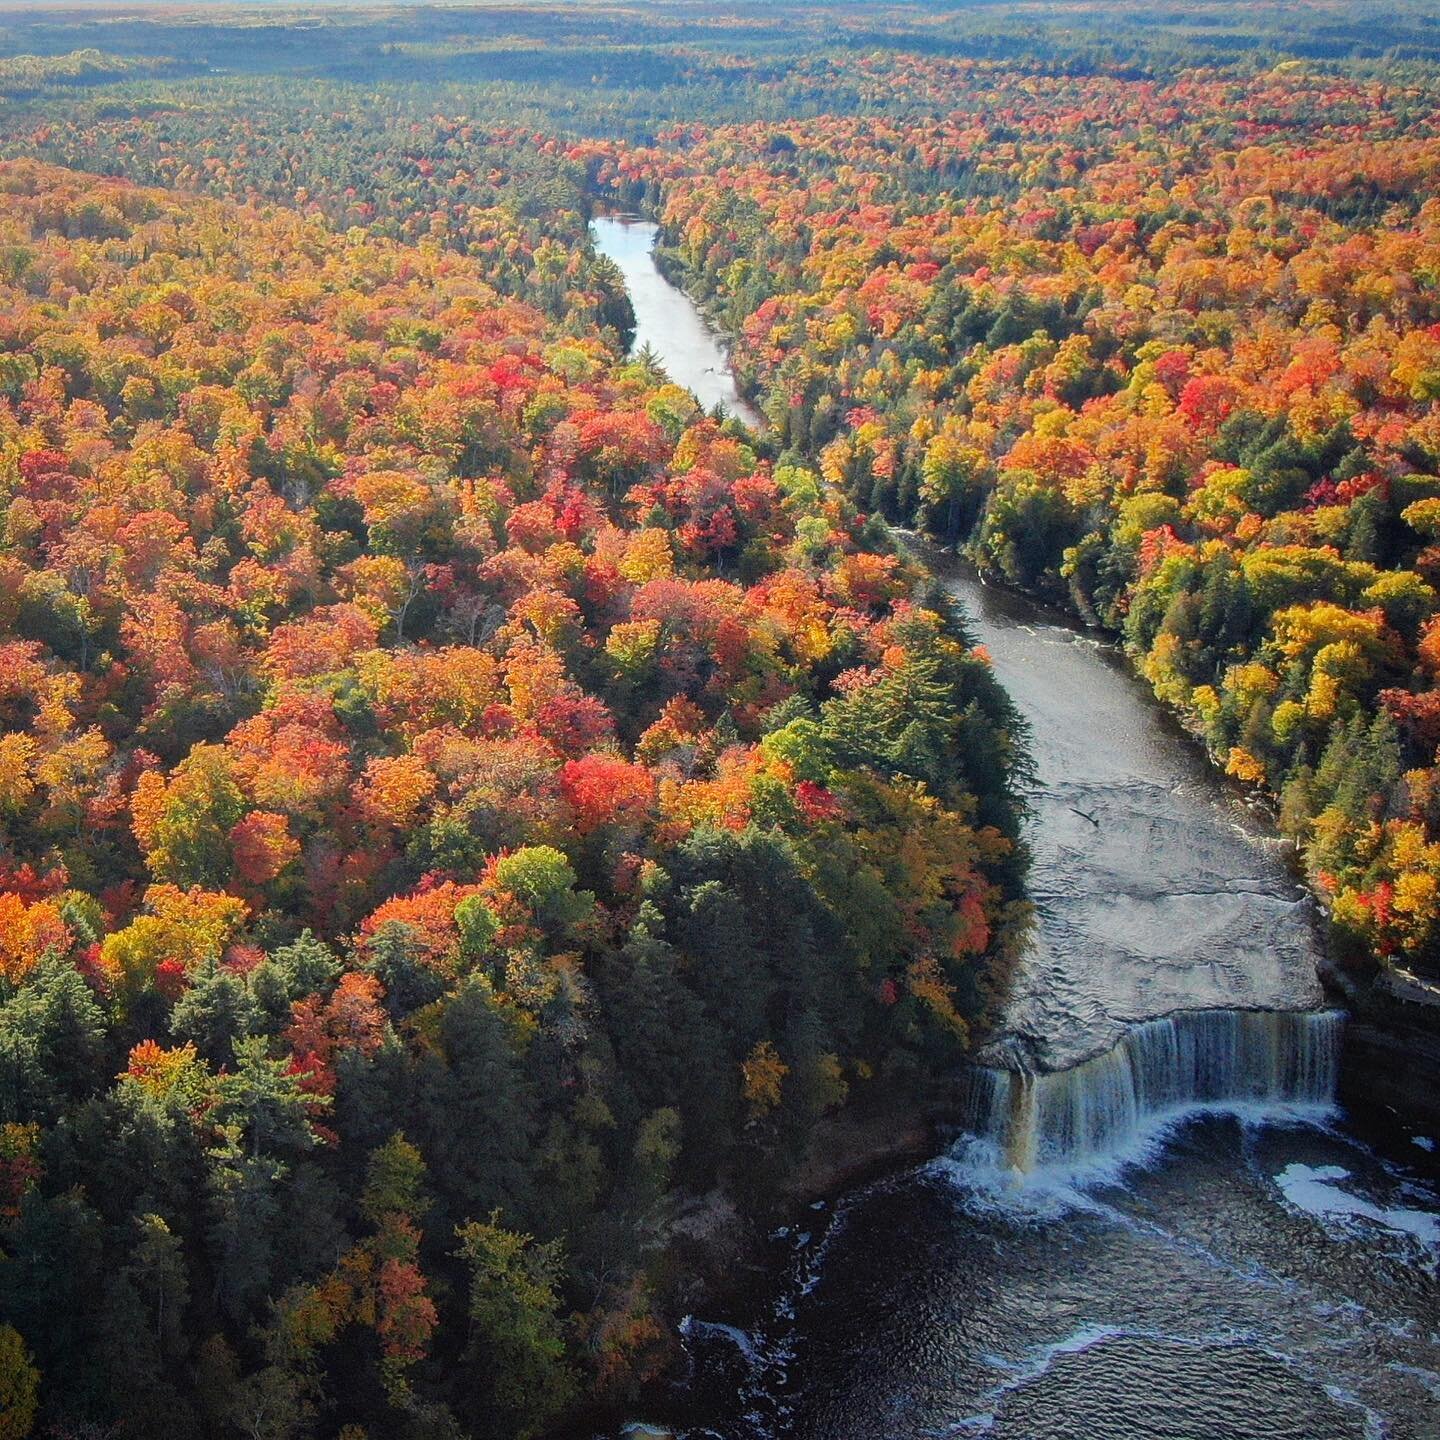 Falls in fall. Head over to Newberry, MI this weekend to catch the colors while they last!
.
.
.
Permission was granted for flight. 
.
#drone #dji #fall #autumn #colors #fallcolors #autumncolors #upperpeninsula #michigan #colors #trees #waterfall #pu